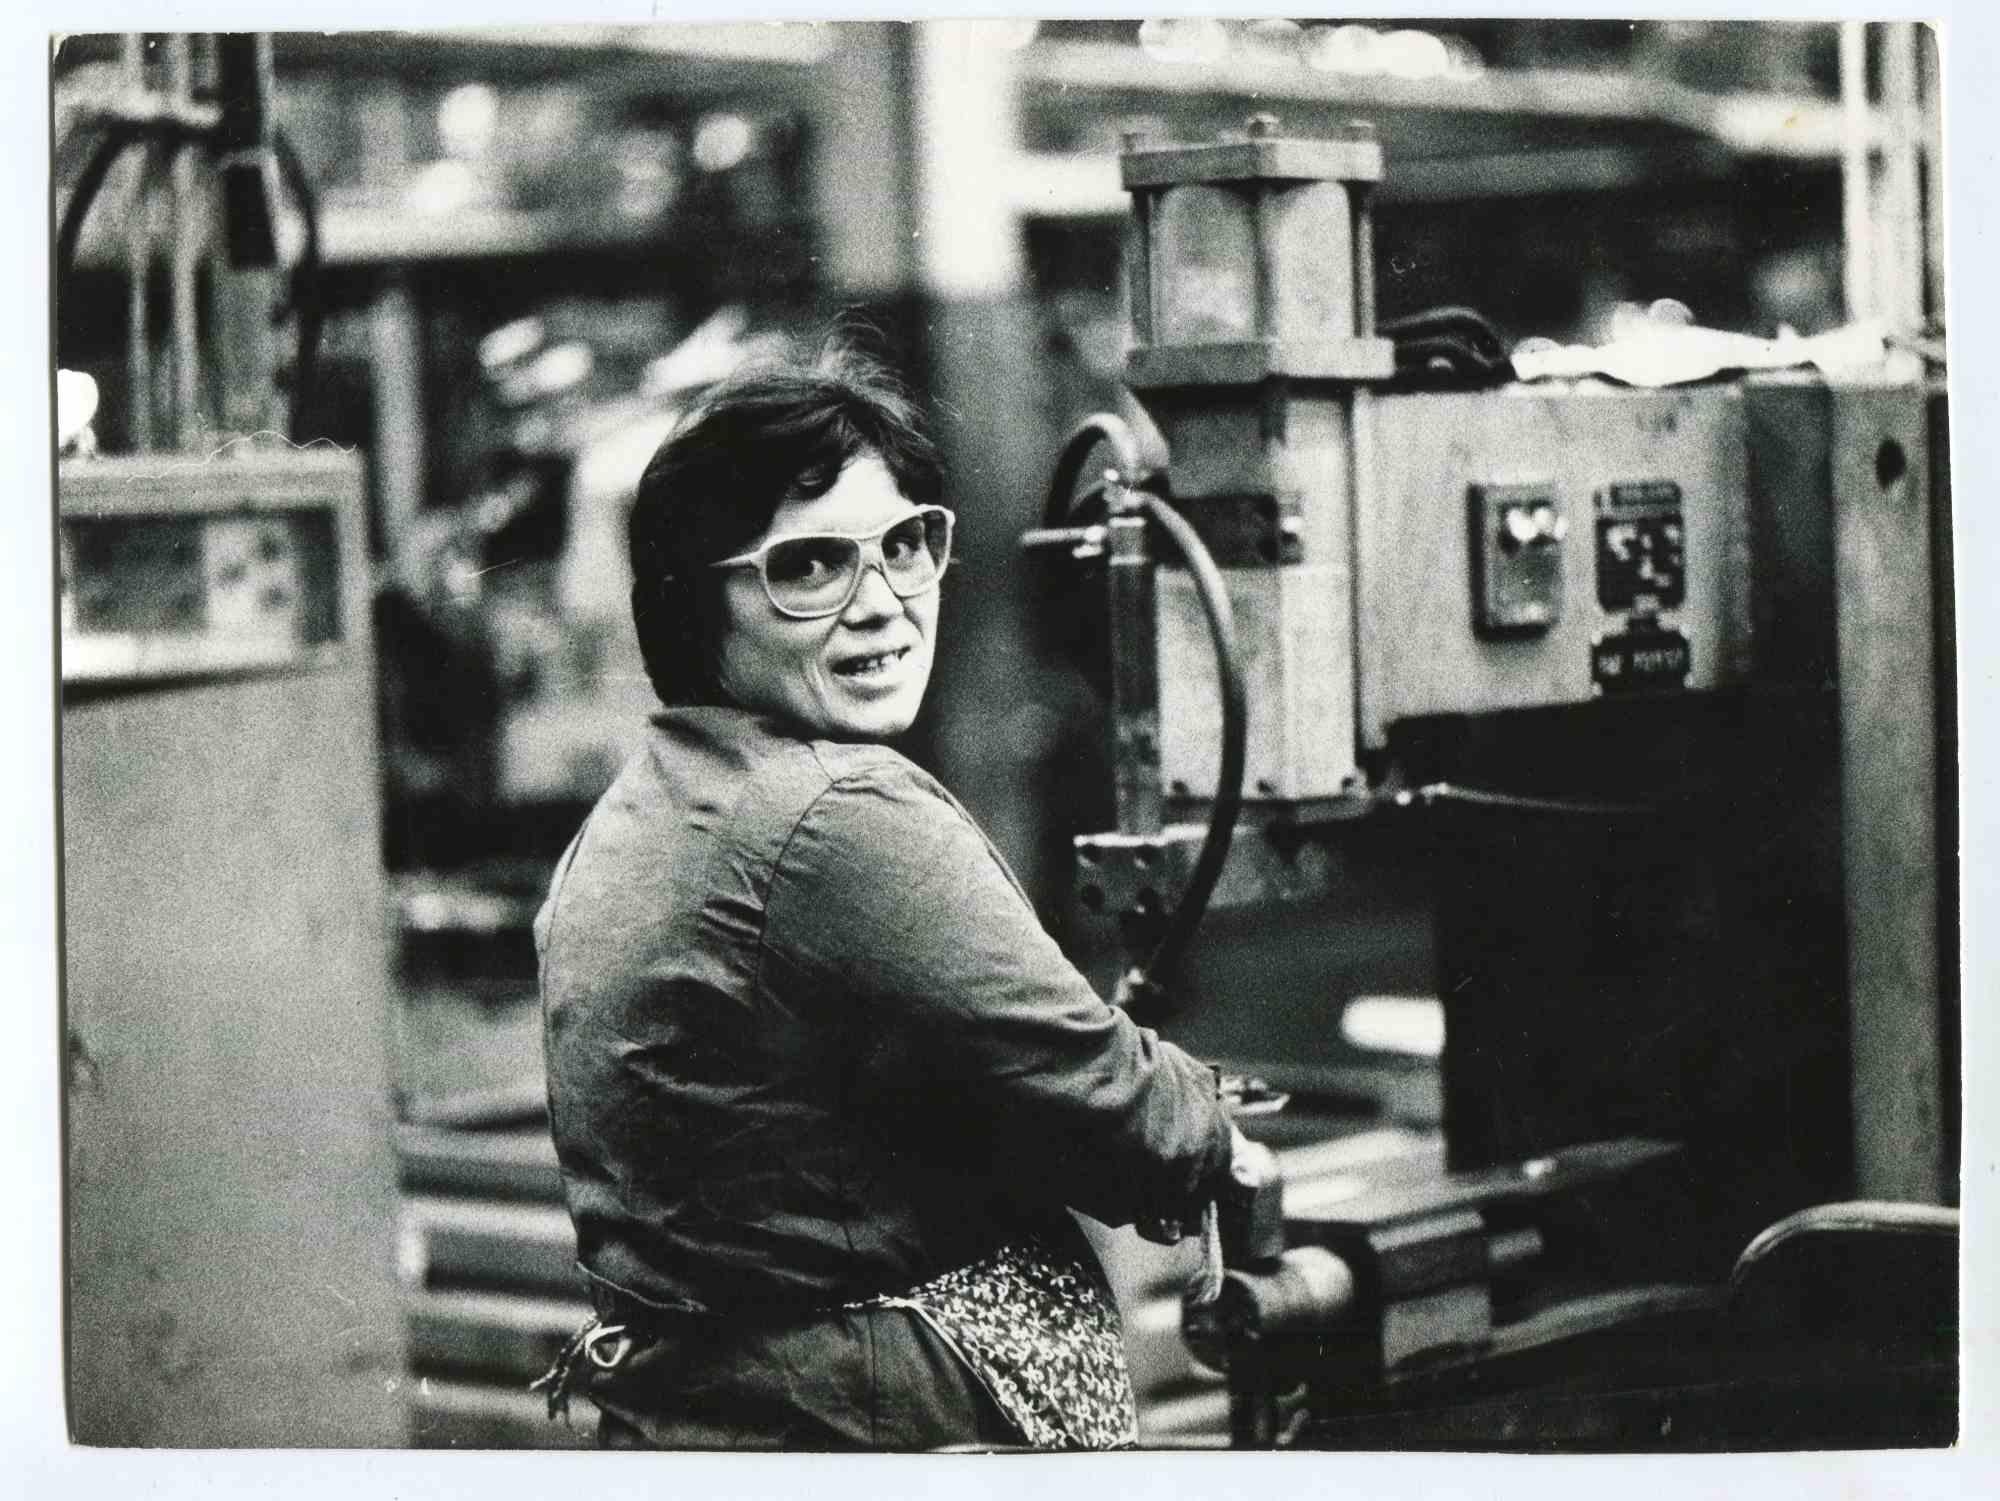 Unknown Portrait Photograph - Women at Work - Historical Photographs About Women Rights - 1960s